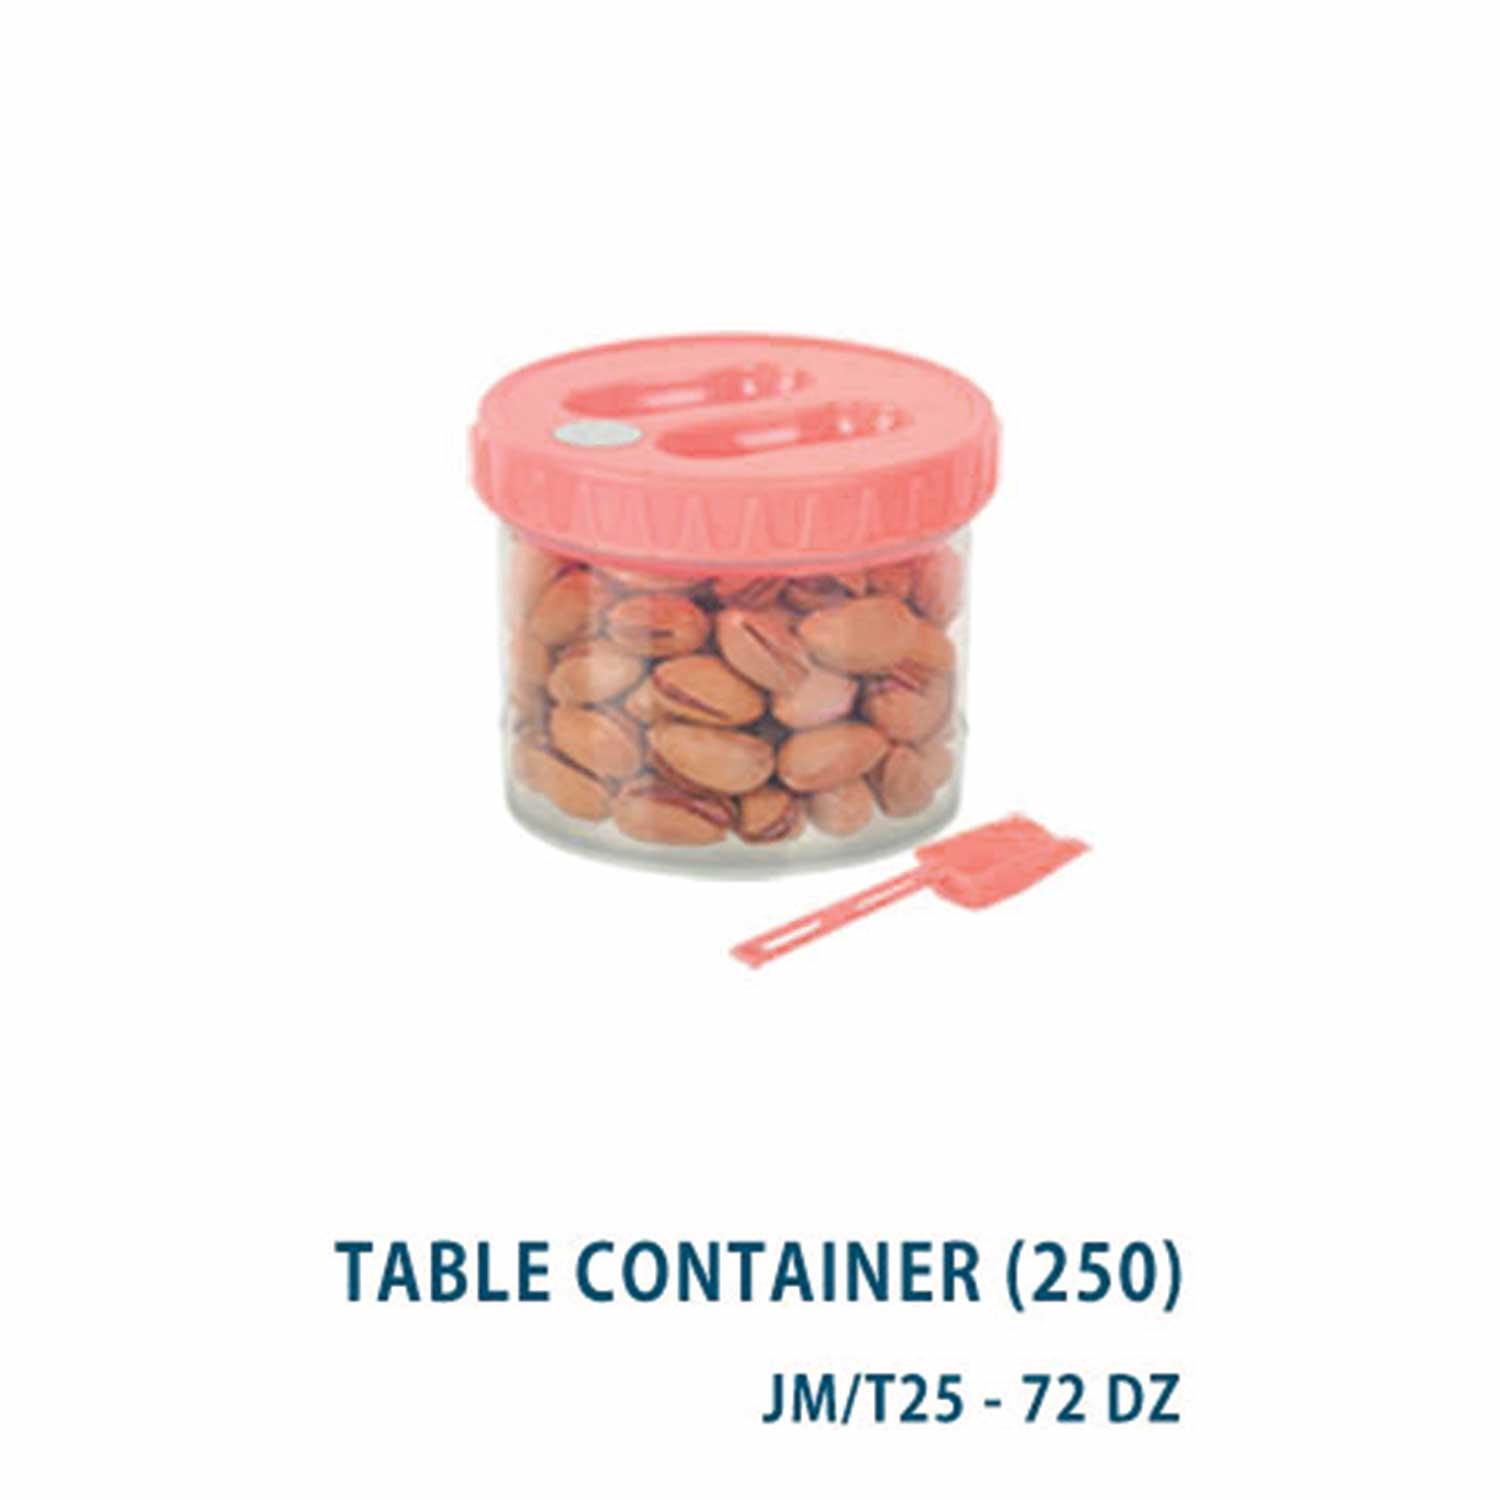 BHAWANI TABLE CONTAINER 250ML PINK  1PC